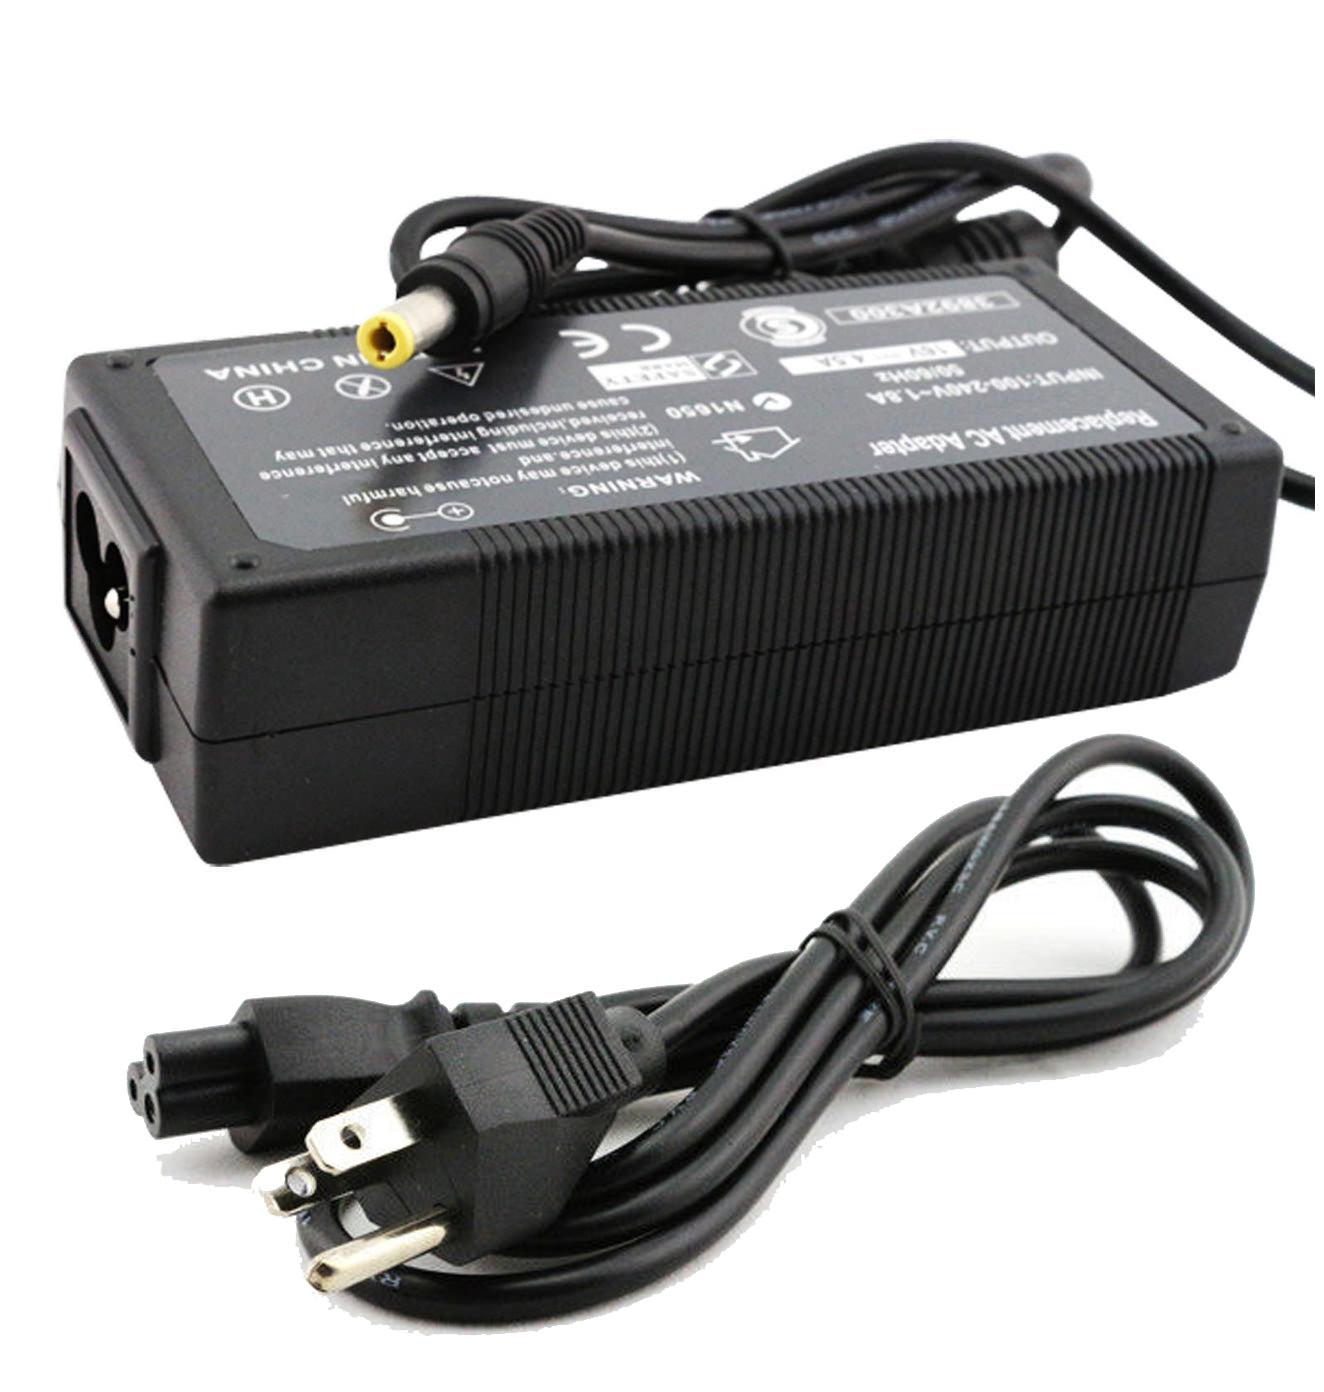 AC Adapter Charger for Panasonic Toughbook CF-74 Notebook.